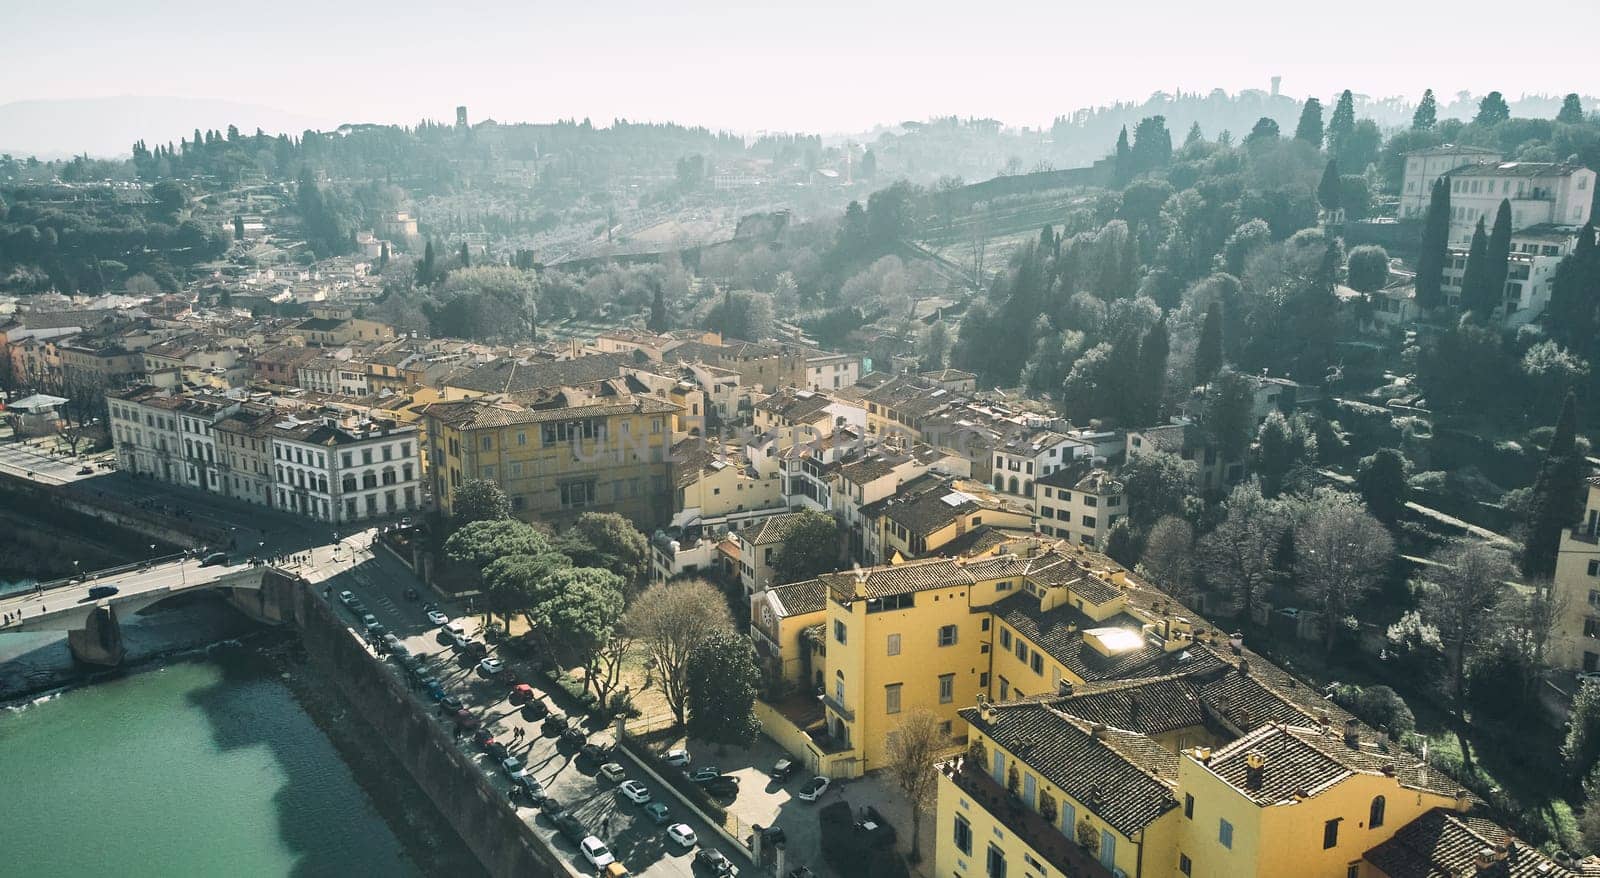 Aerial view of Florence cityscape and old italian style buildings. High quality photo